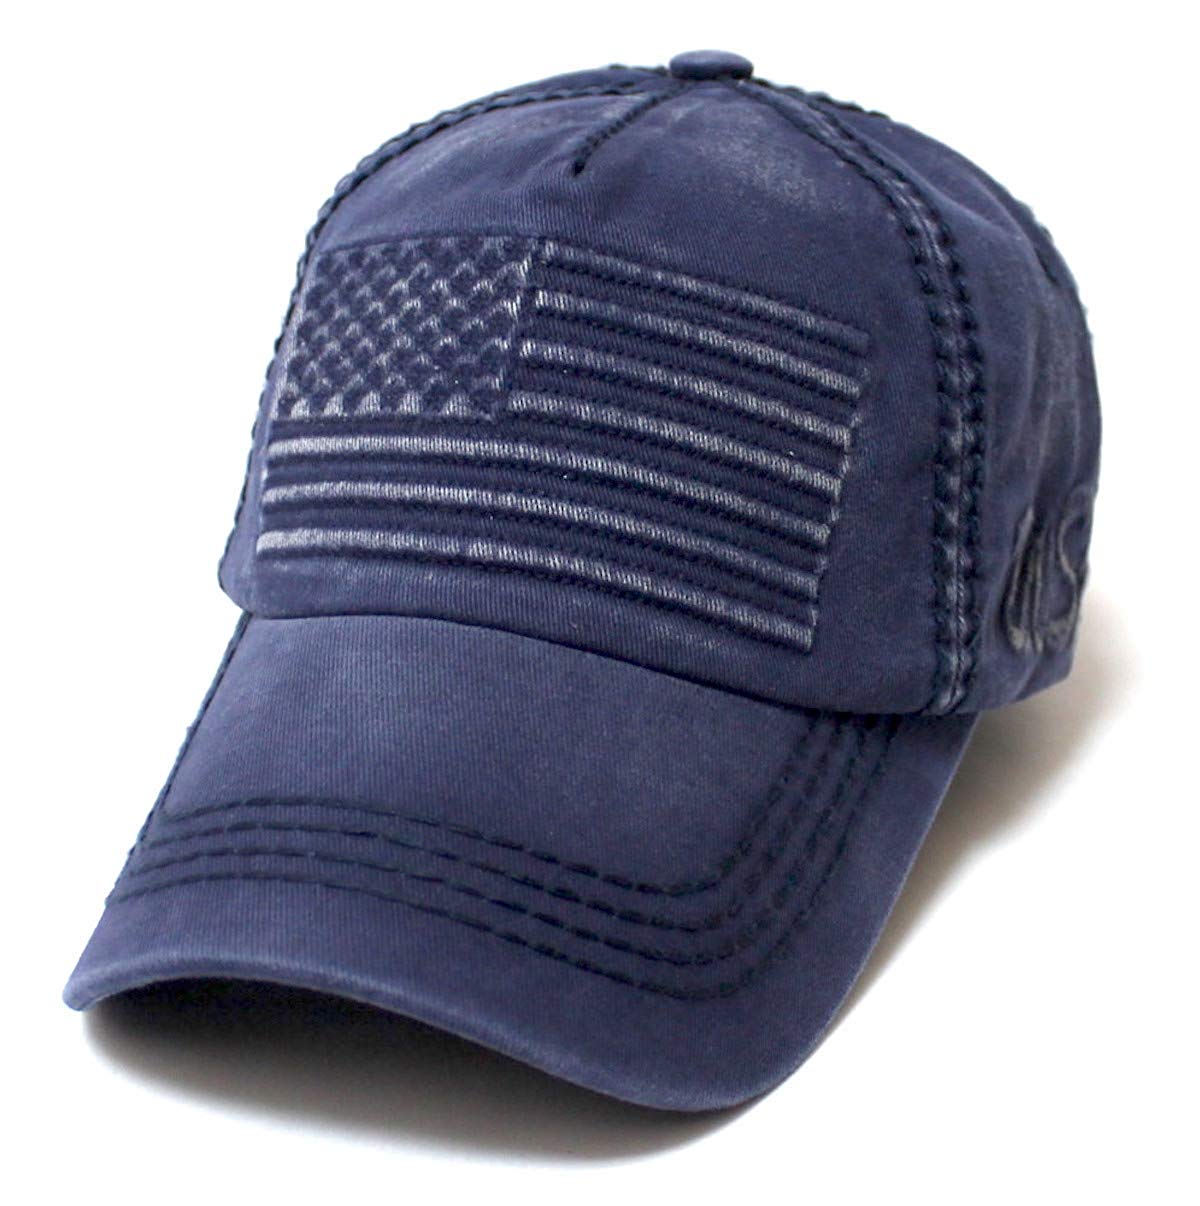 Classic Low Profile USA Flag Embroidery Ball Cap, Vintage Navy Blue - Caps 'N Vintage 